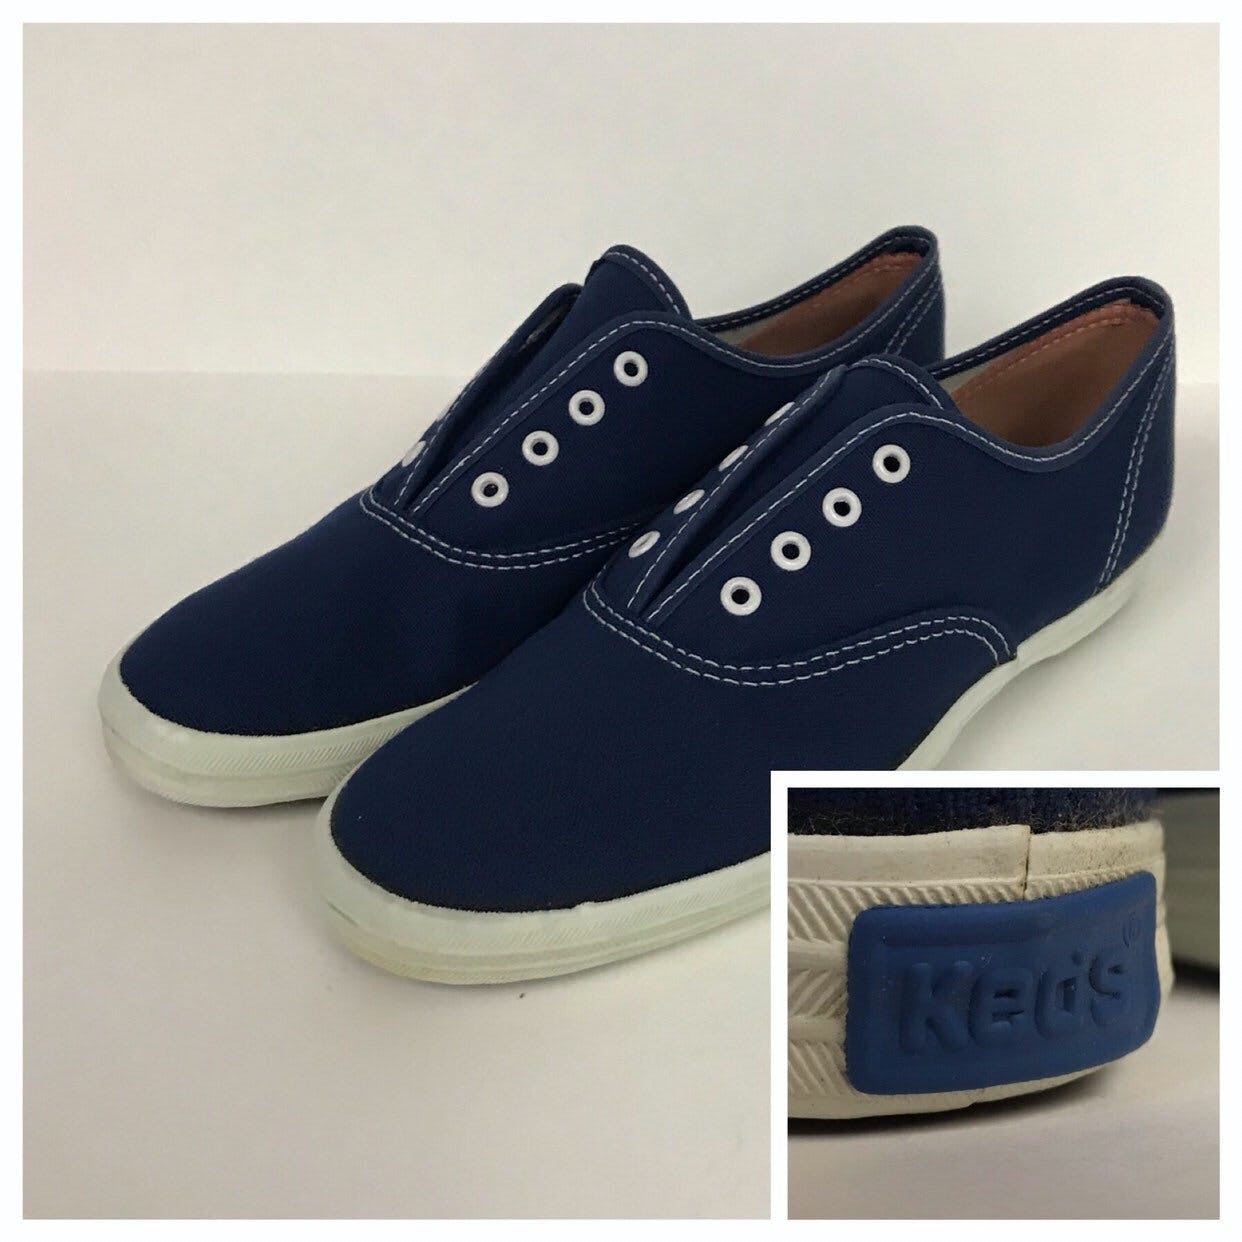 Vintage 80’s Navy Blue Canvas Lace Up Tennis Shoes by Keds knockabouts ...